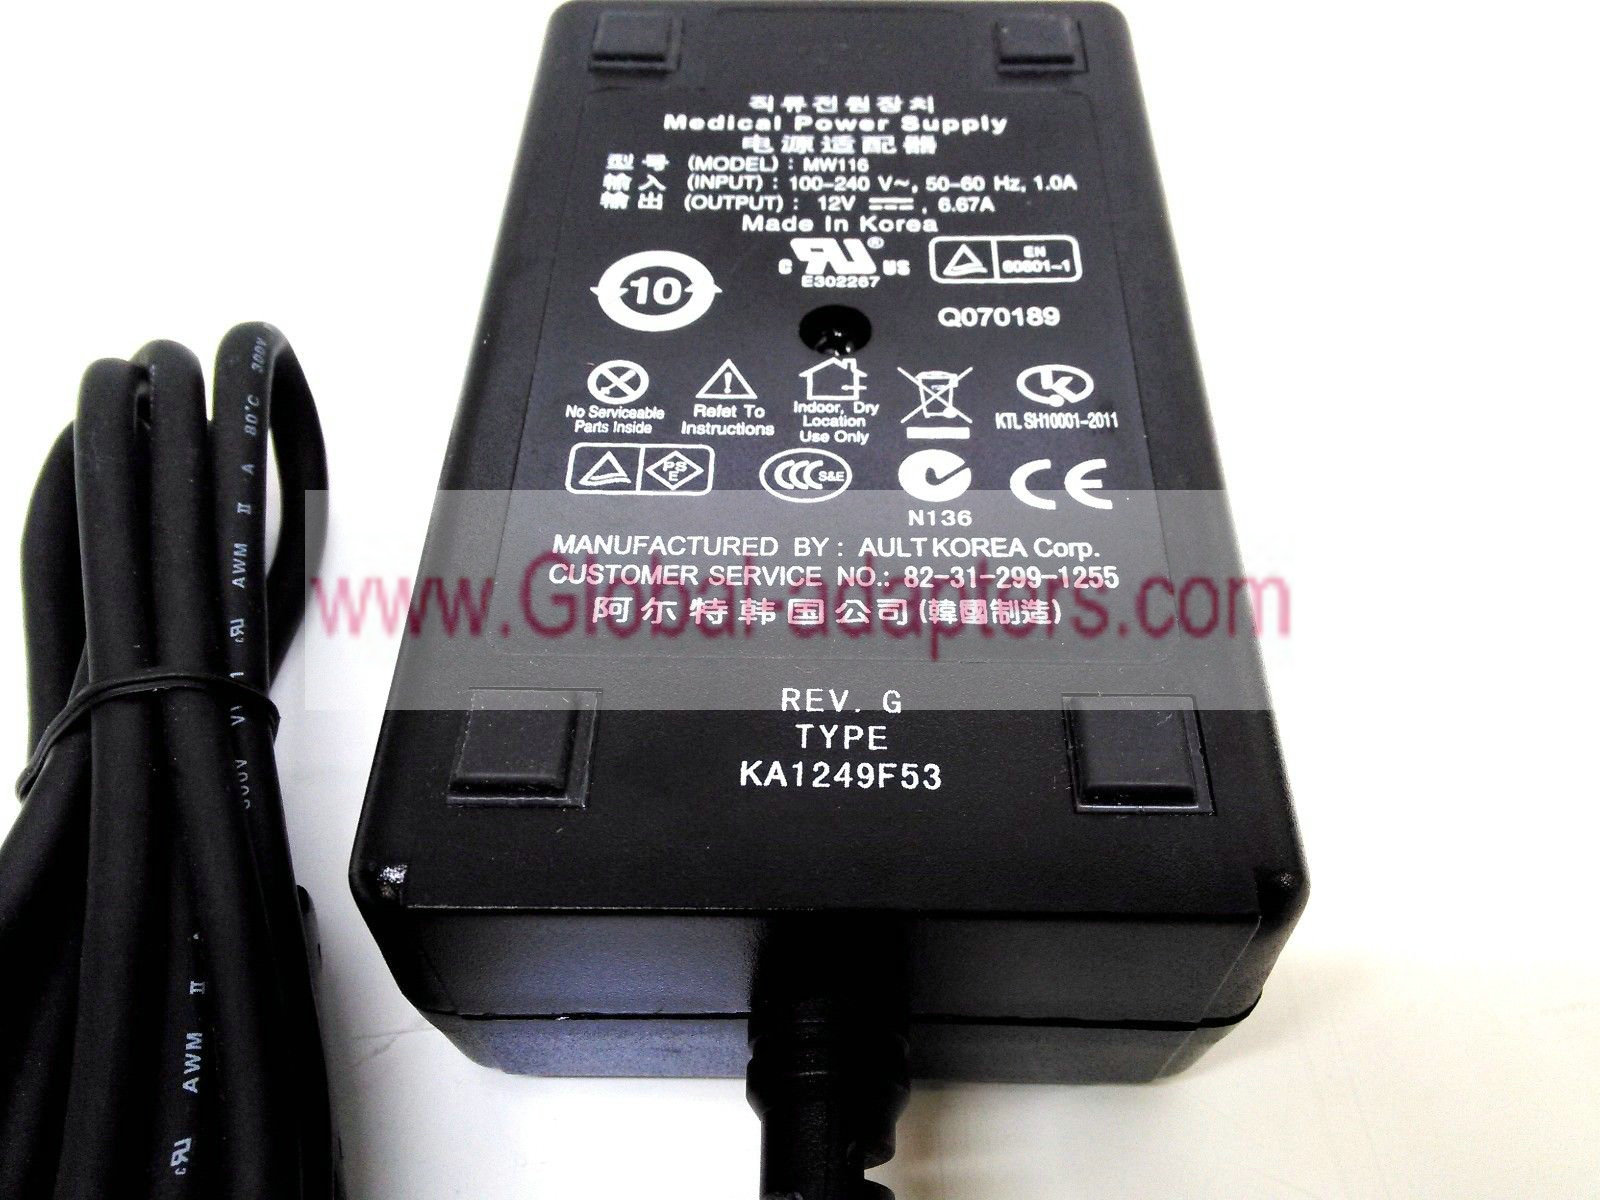 New 12VDC 6.67A MW116 KA1249F63 ac adapter for X-Ray Viewer, I.T.E.Power Supply 4Pin - Click Image to Close